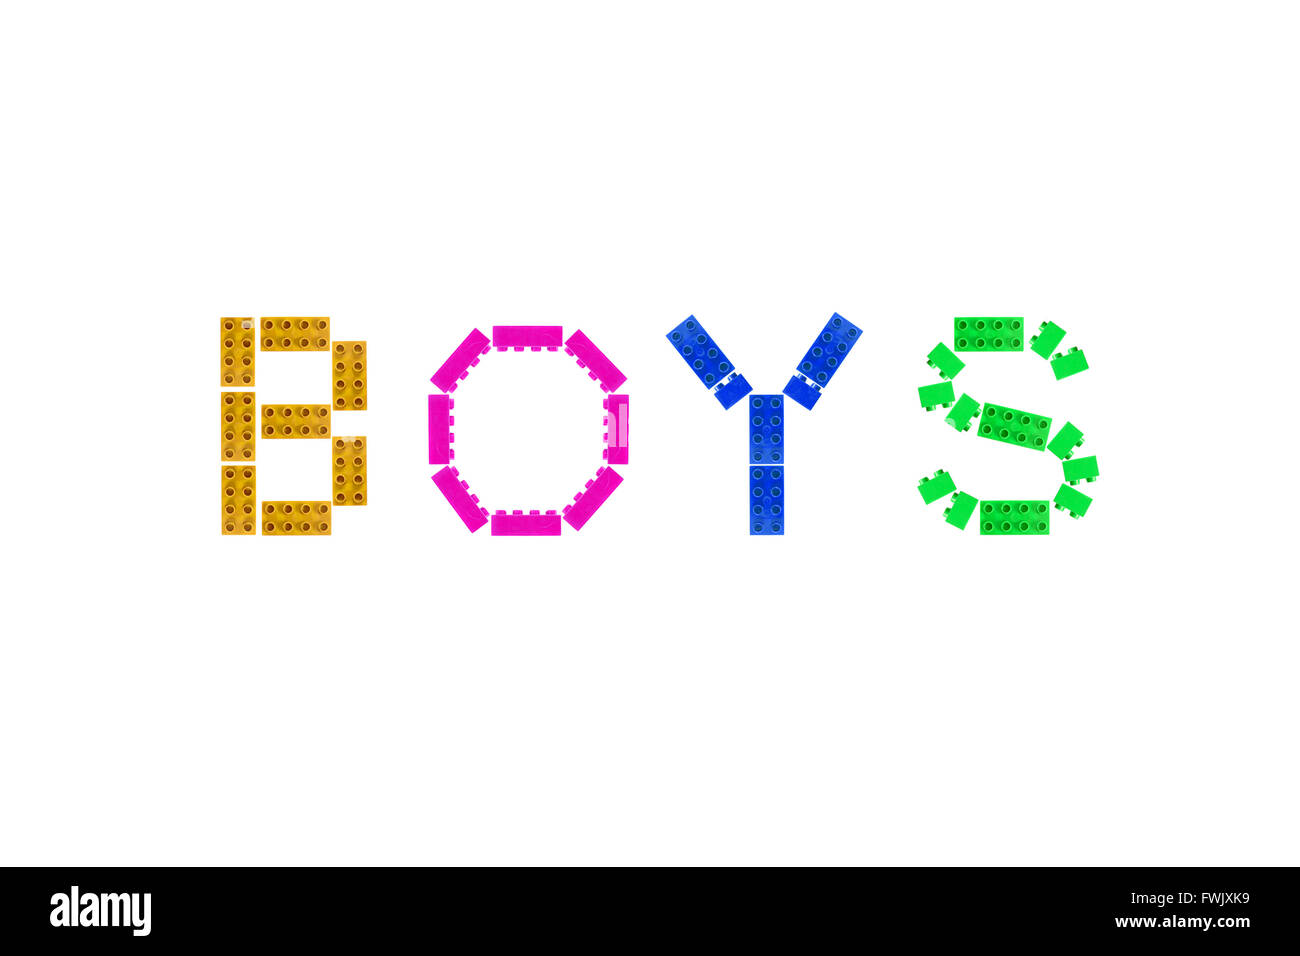 The word Boys created from pieces of Lego photographed against a black background. Stock Photo